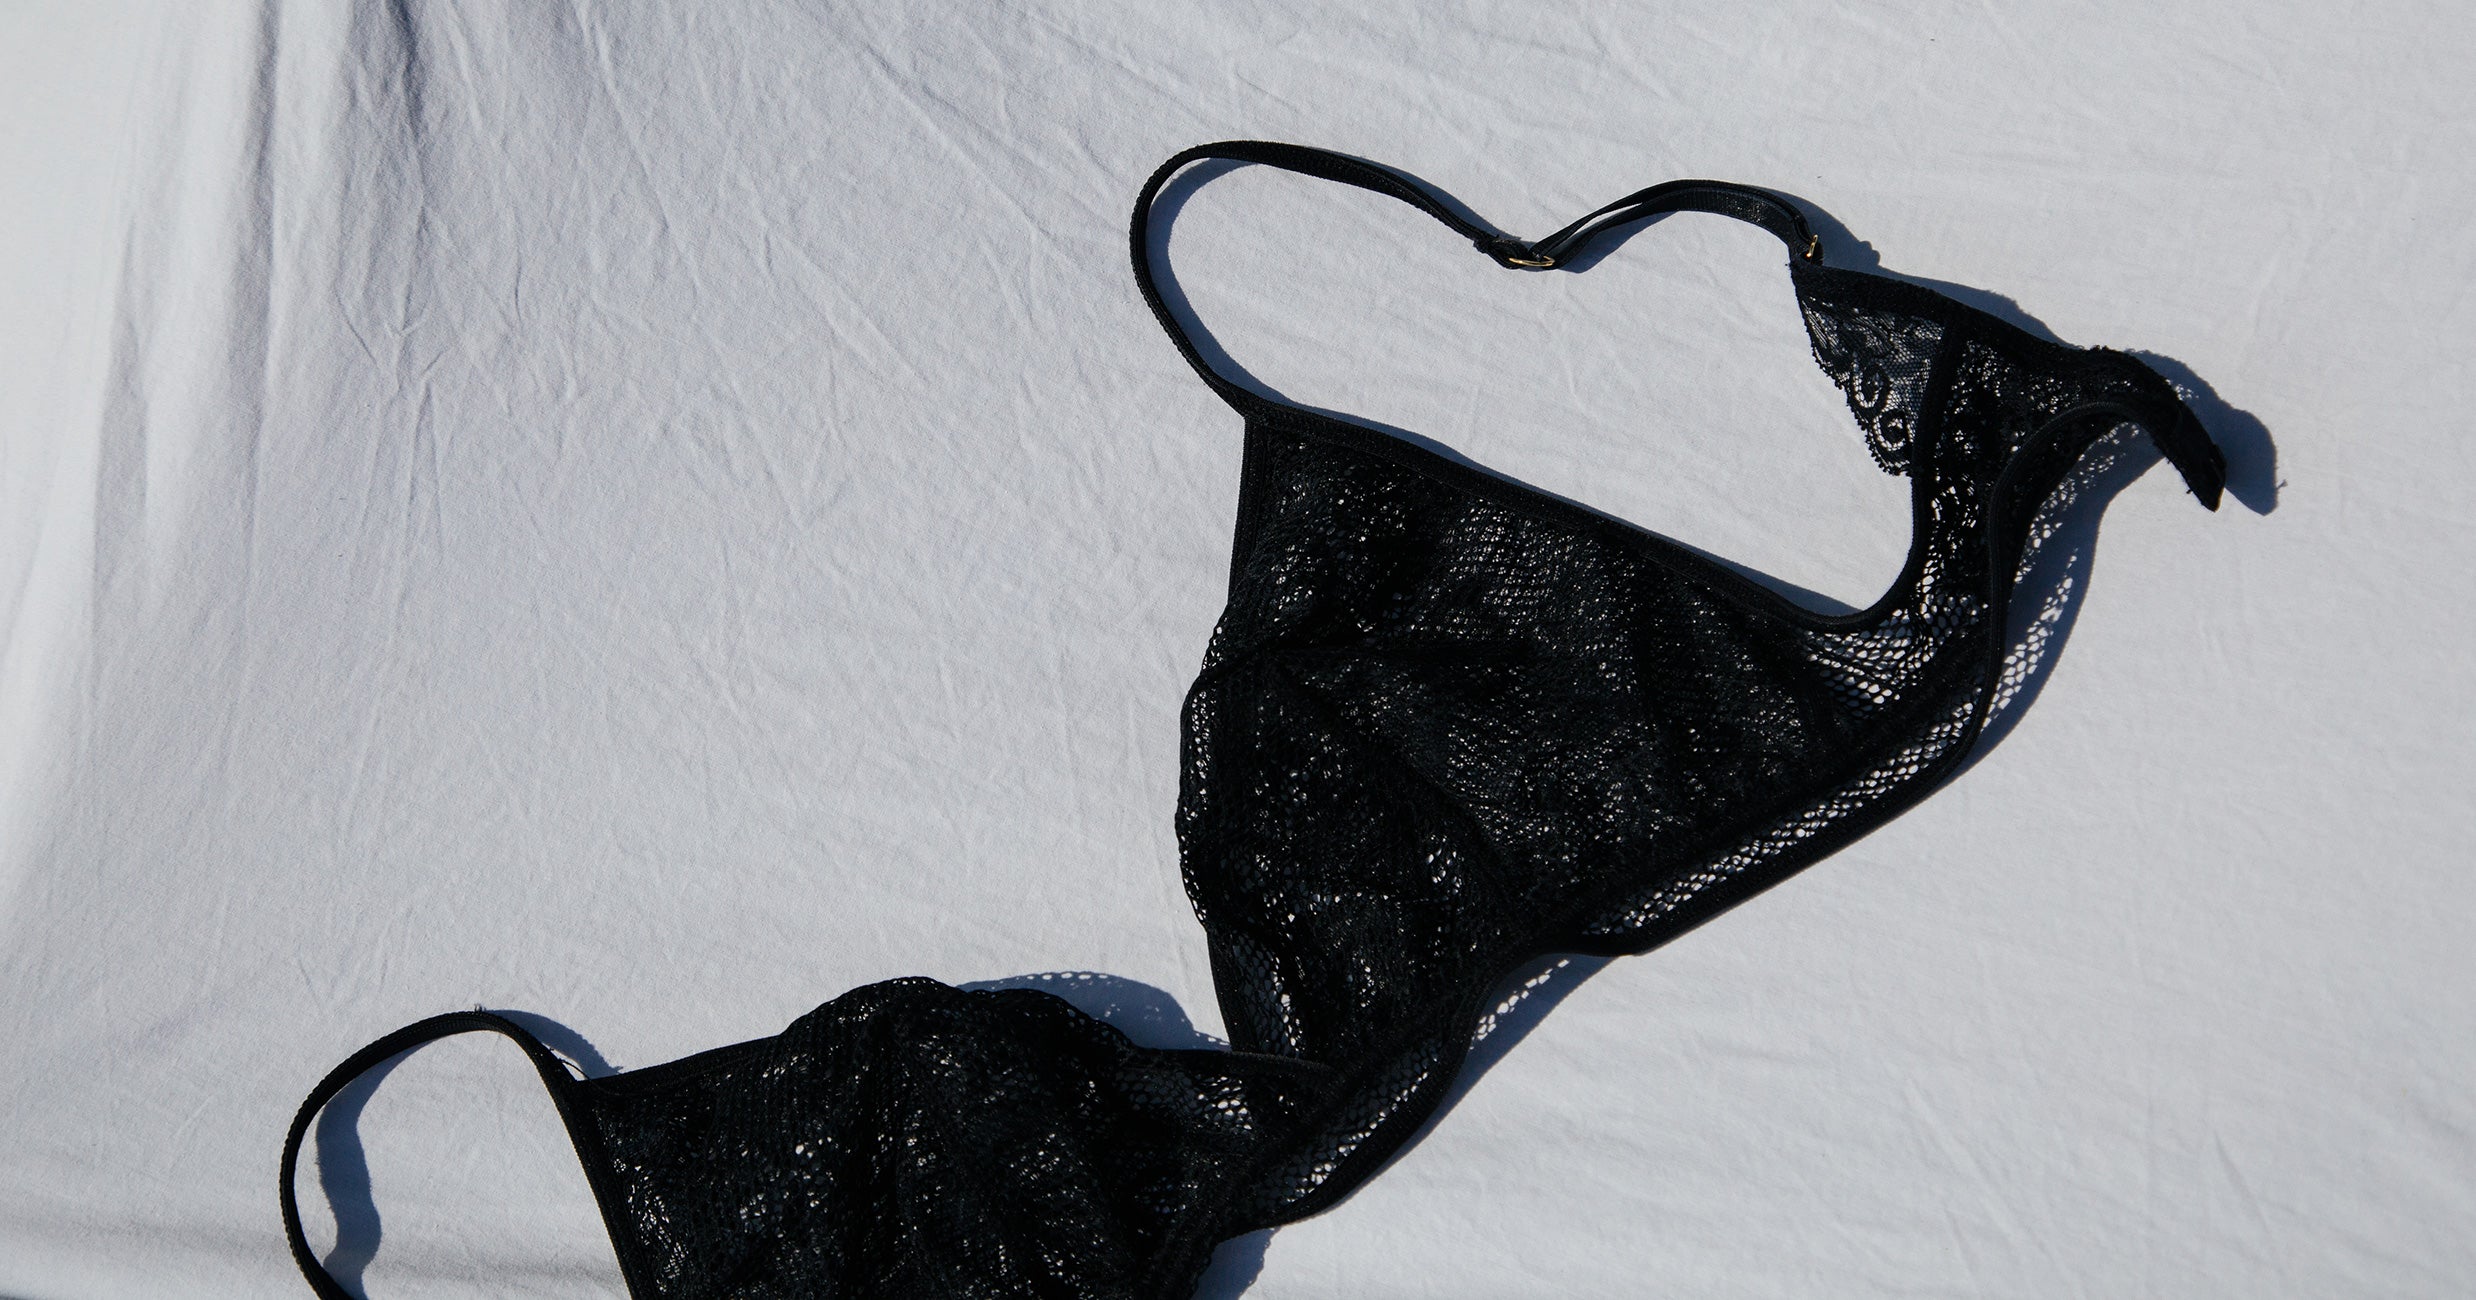 How does selling used panties work? - Quora